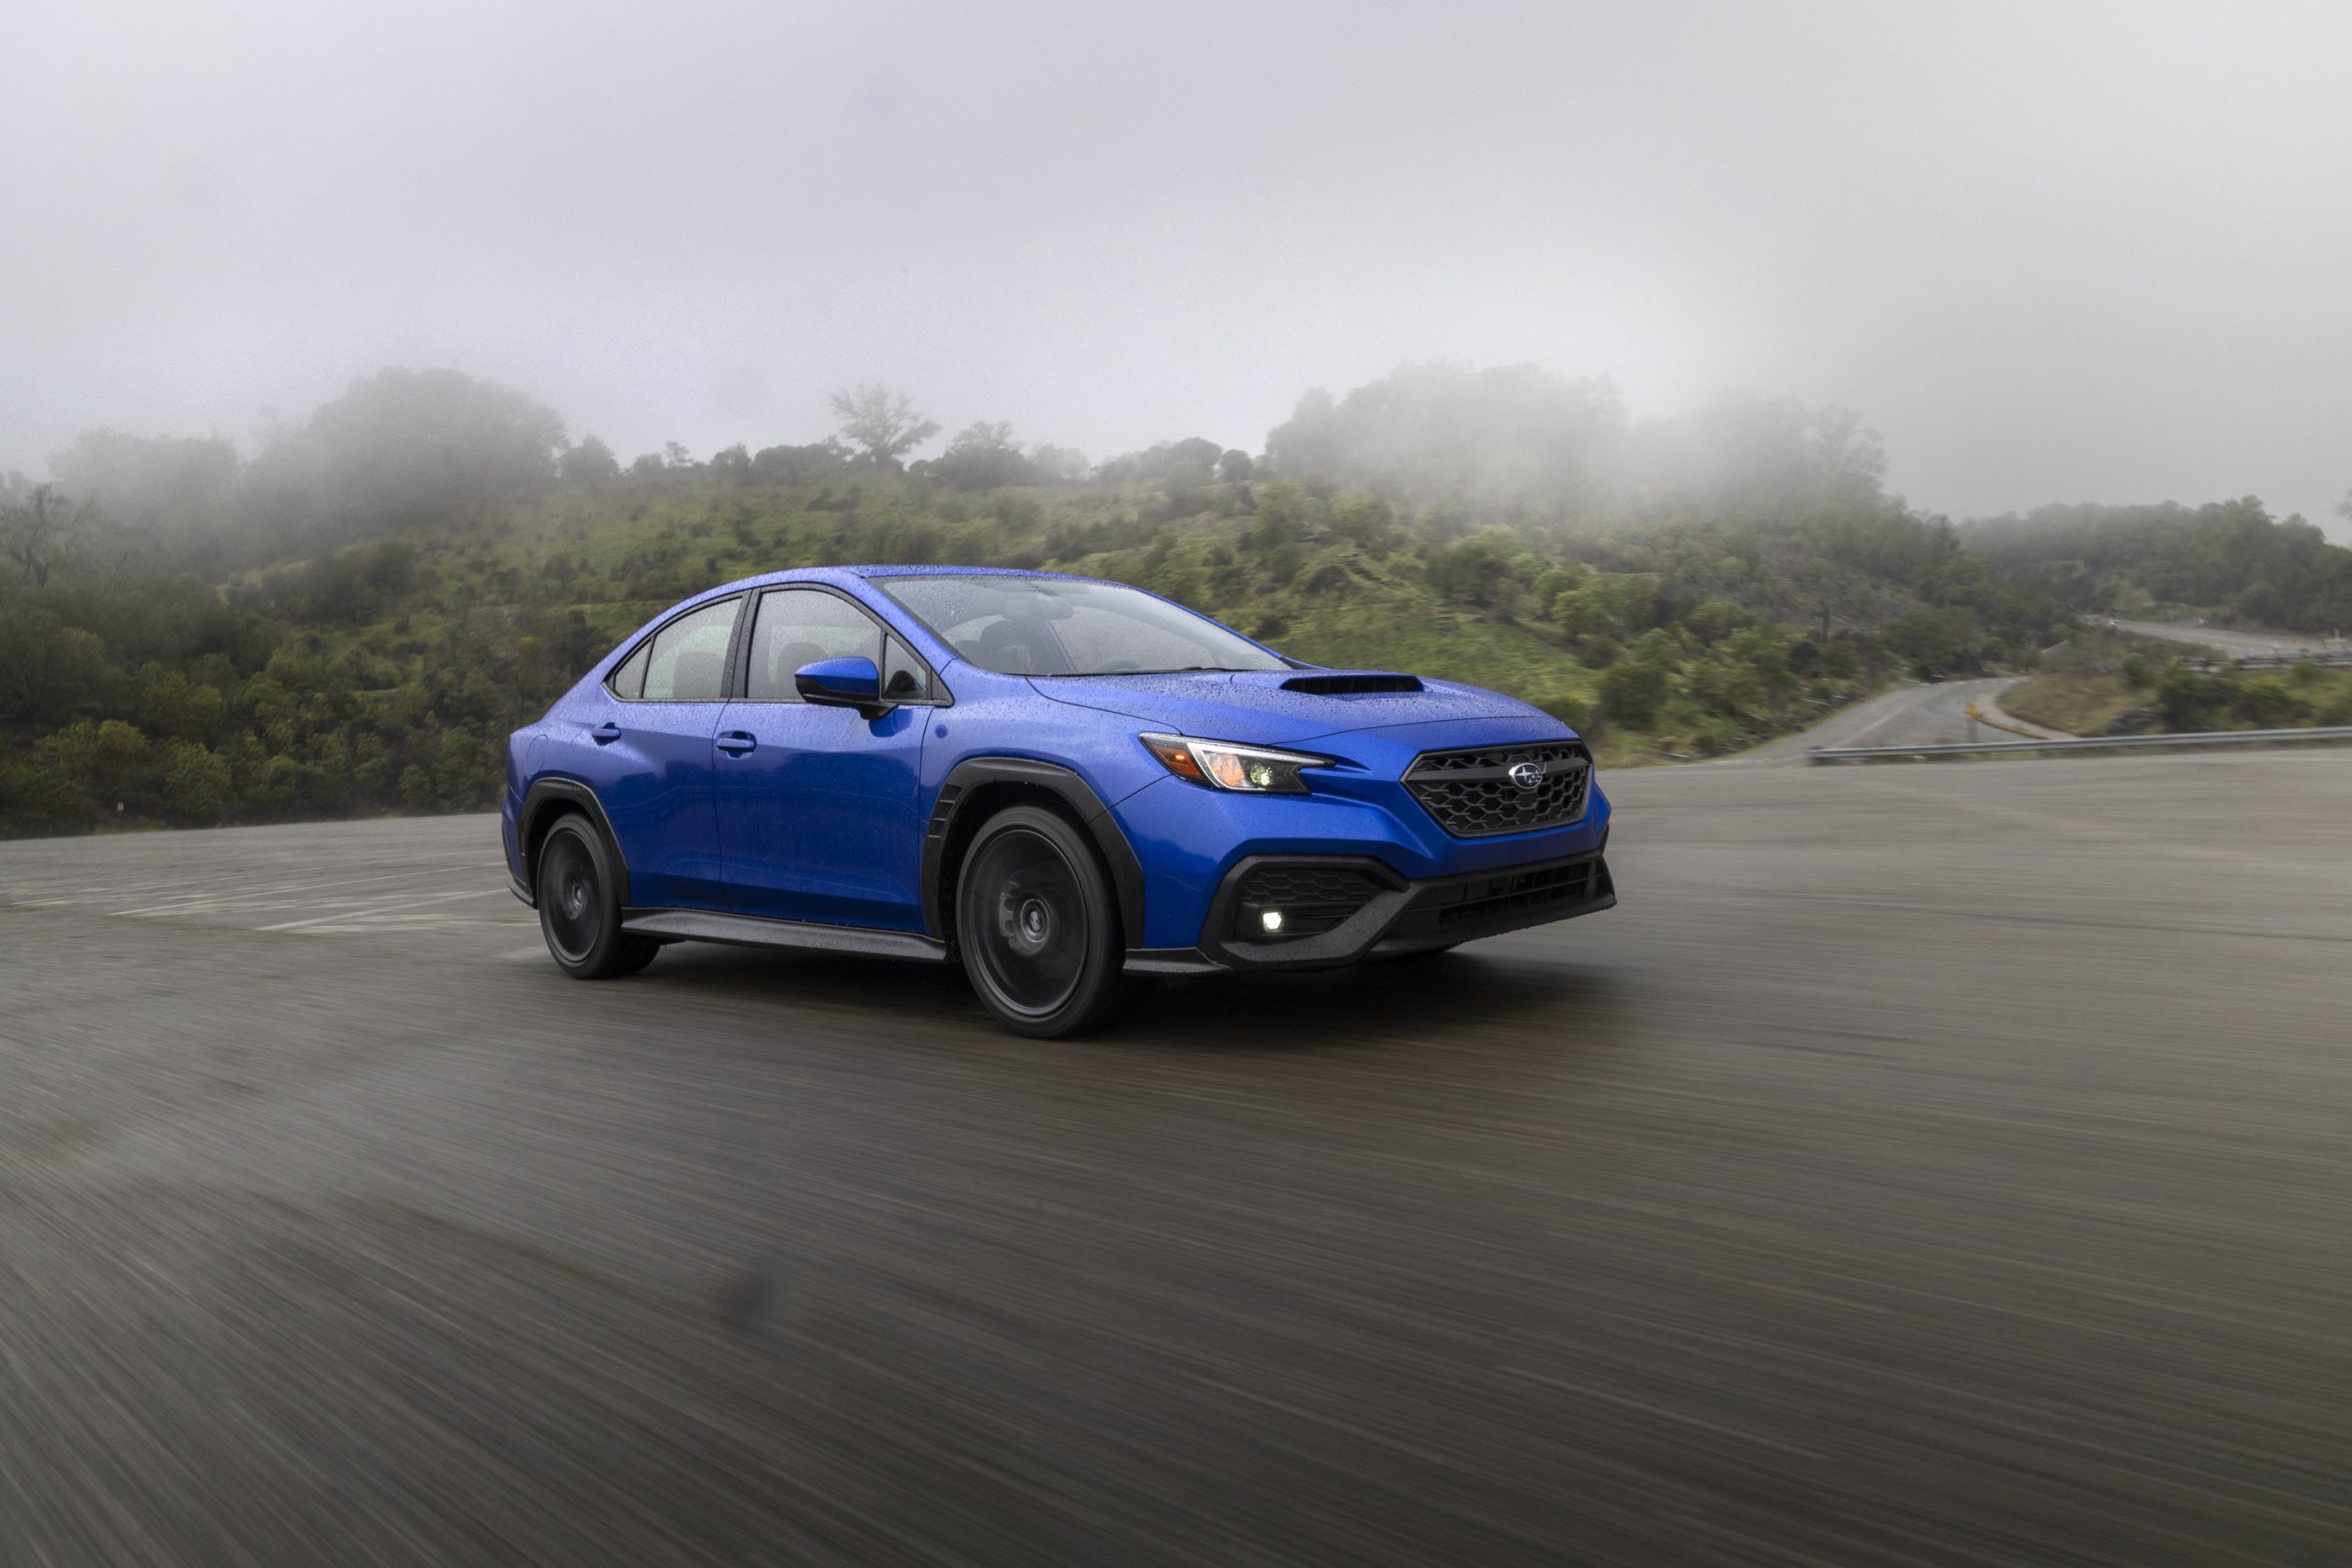 A Rally Blue 2022 Subaru WRX, which swayed Doug DeMuro's opinion, shot from the front 3/4 in the rain